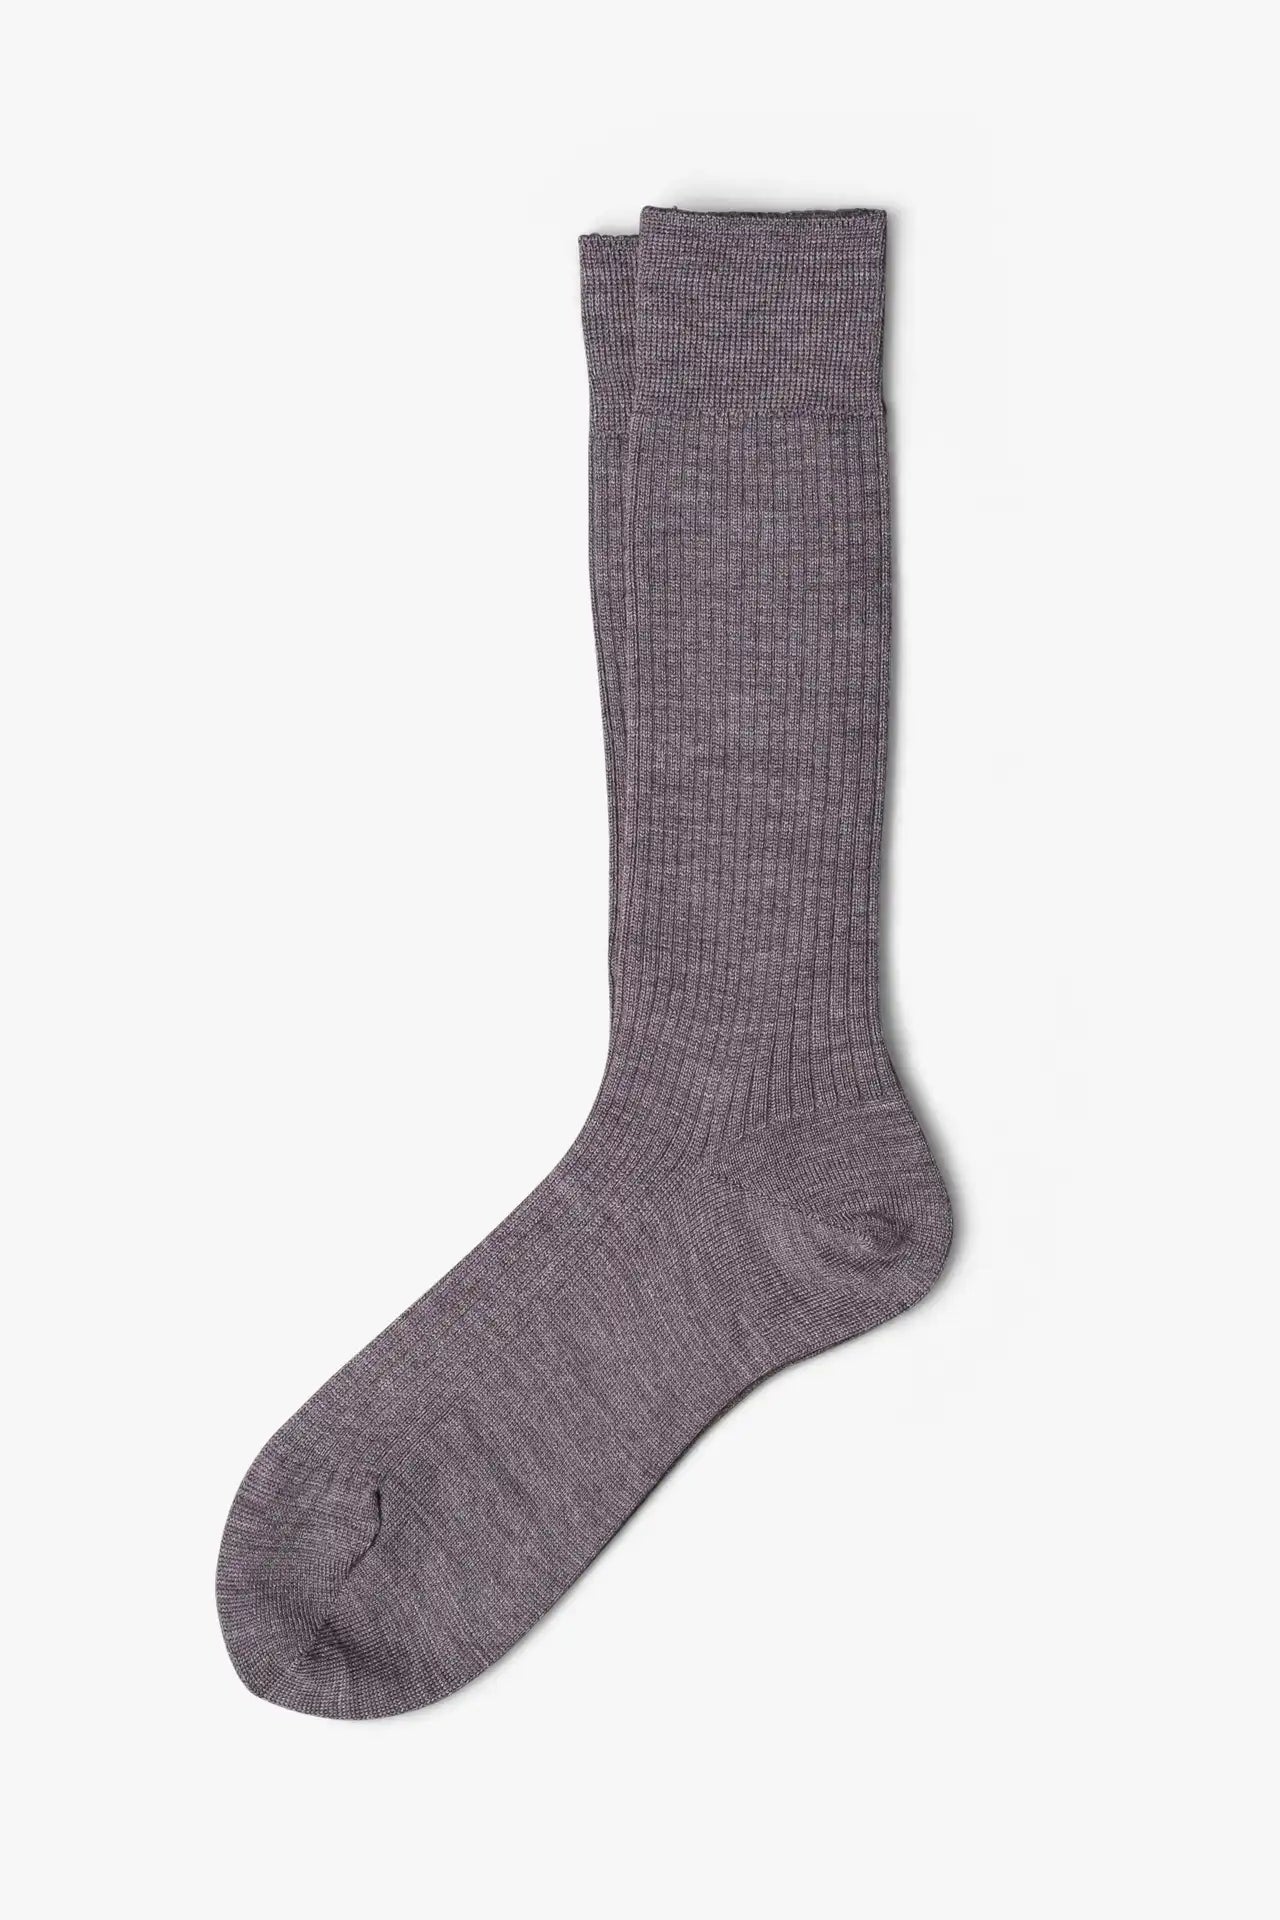 Gray dress socks in merino wool. Swedish design by once a day and produced by glenn clyde. Can we washed in warm water without shrinking.